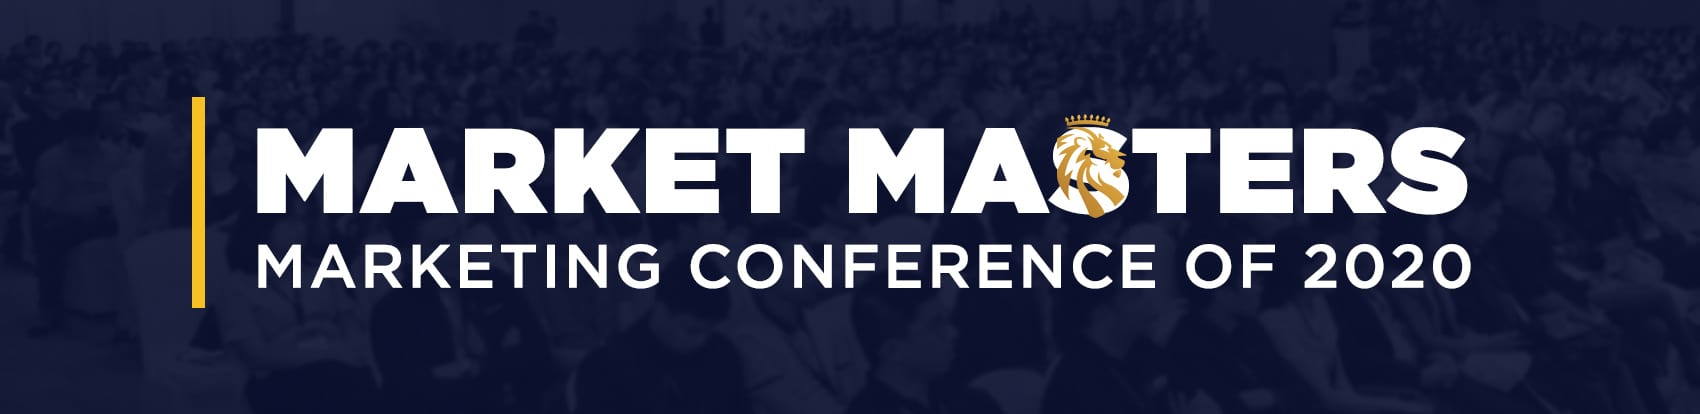 12th Market Masters Conference